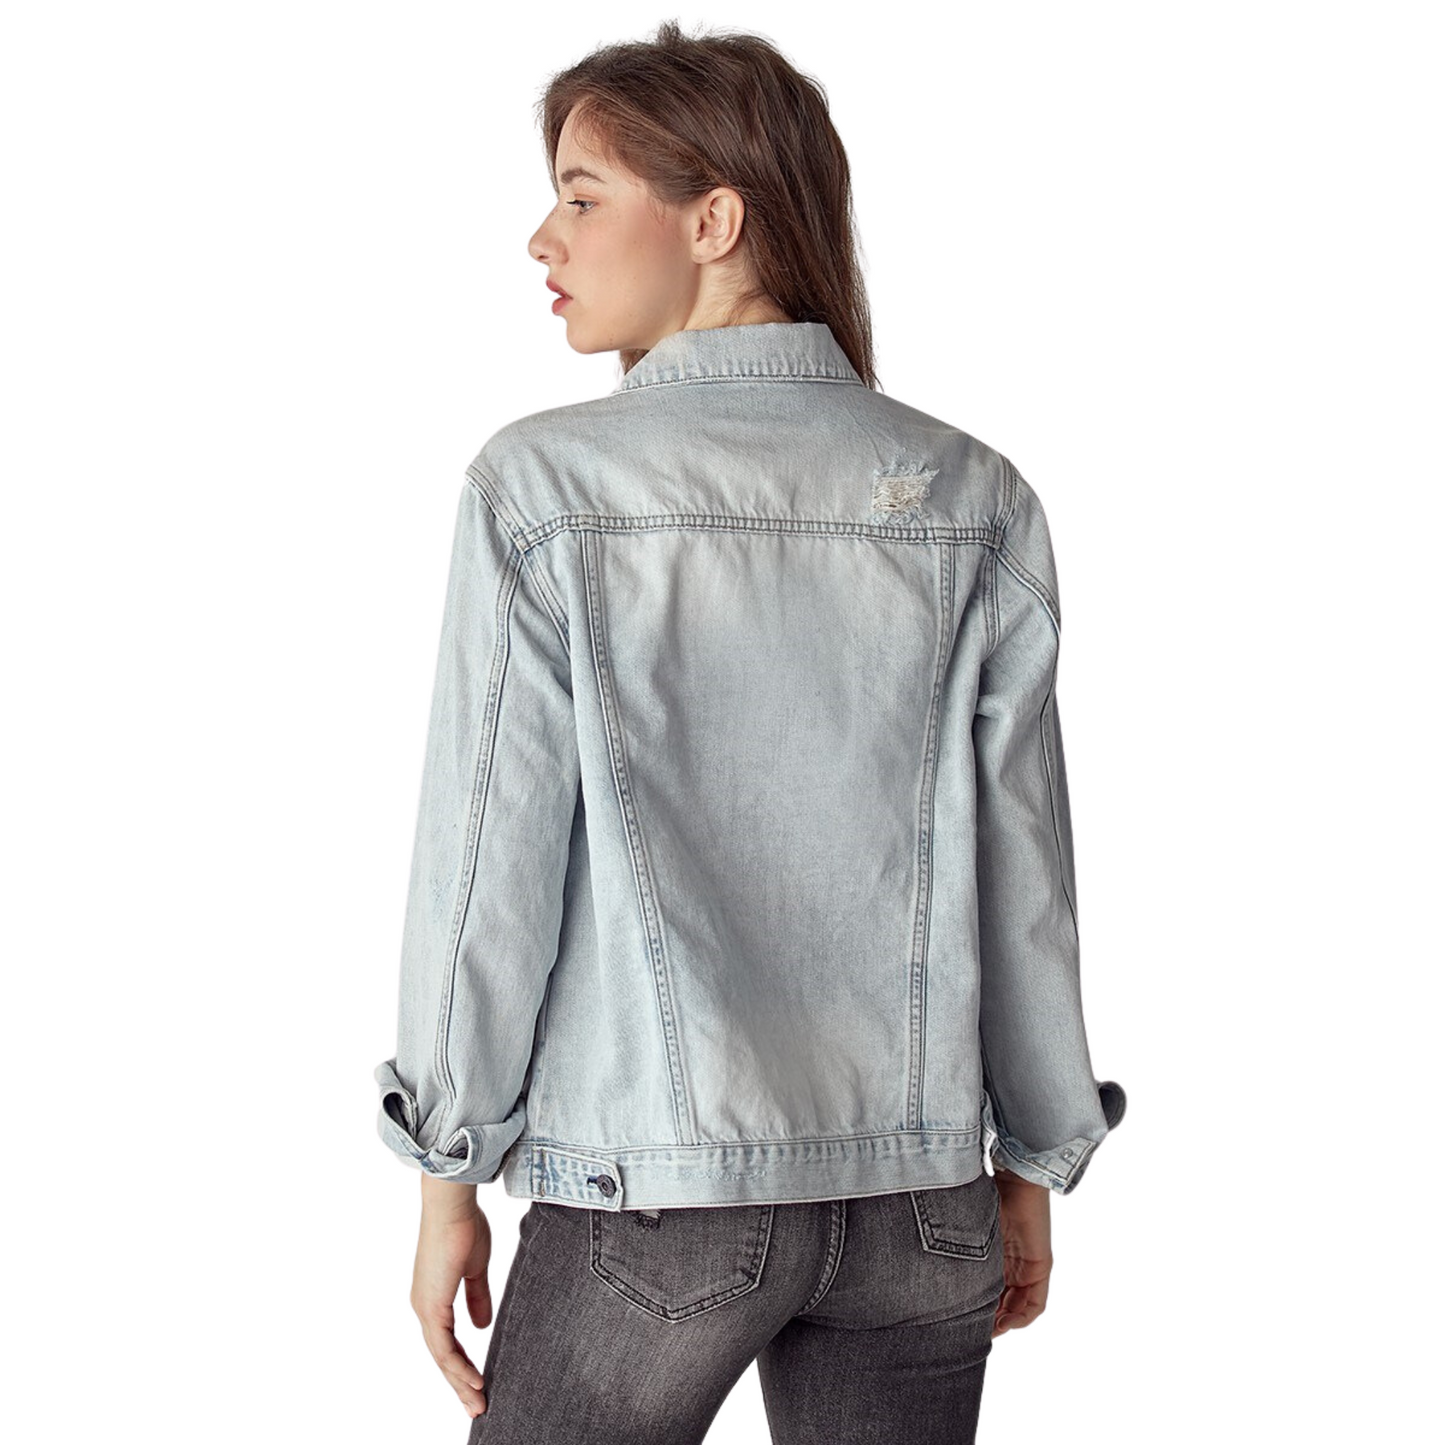 This Relaxed Fit Vintage Jacket is perfect for any casual occasion. Crafted from light wash denim with distressed details, it is sure to give a vintage feel to your look. Its relaxed fit ensures maximum comfort while making a stylish statement.